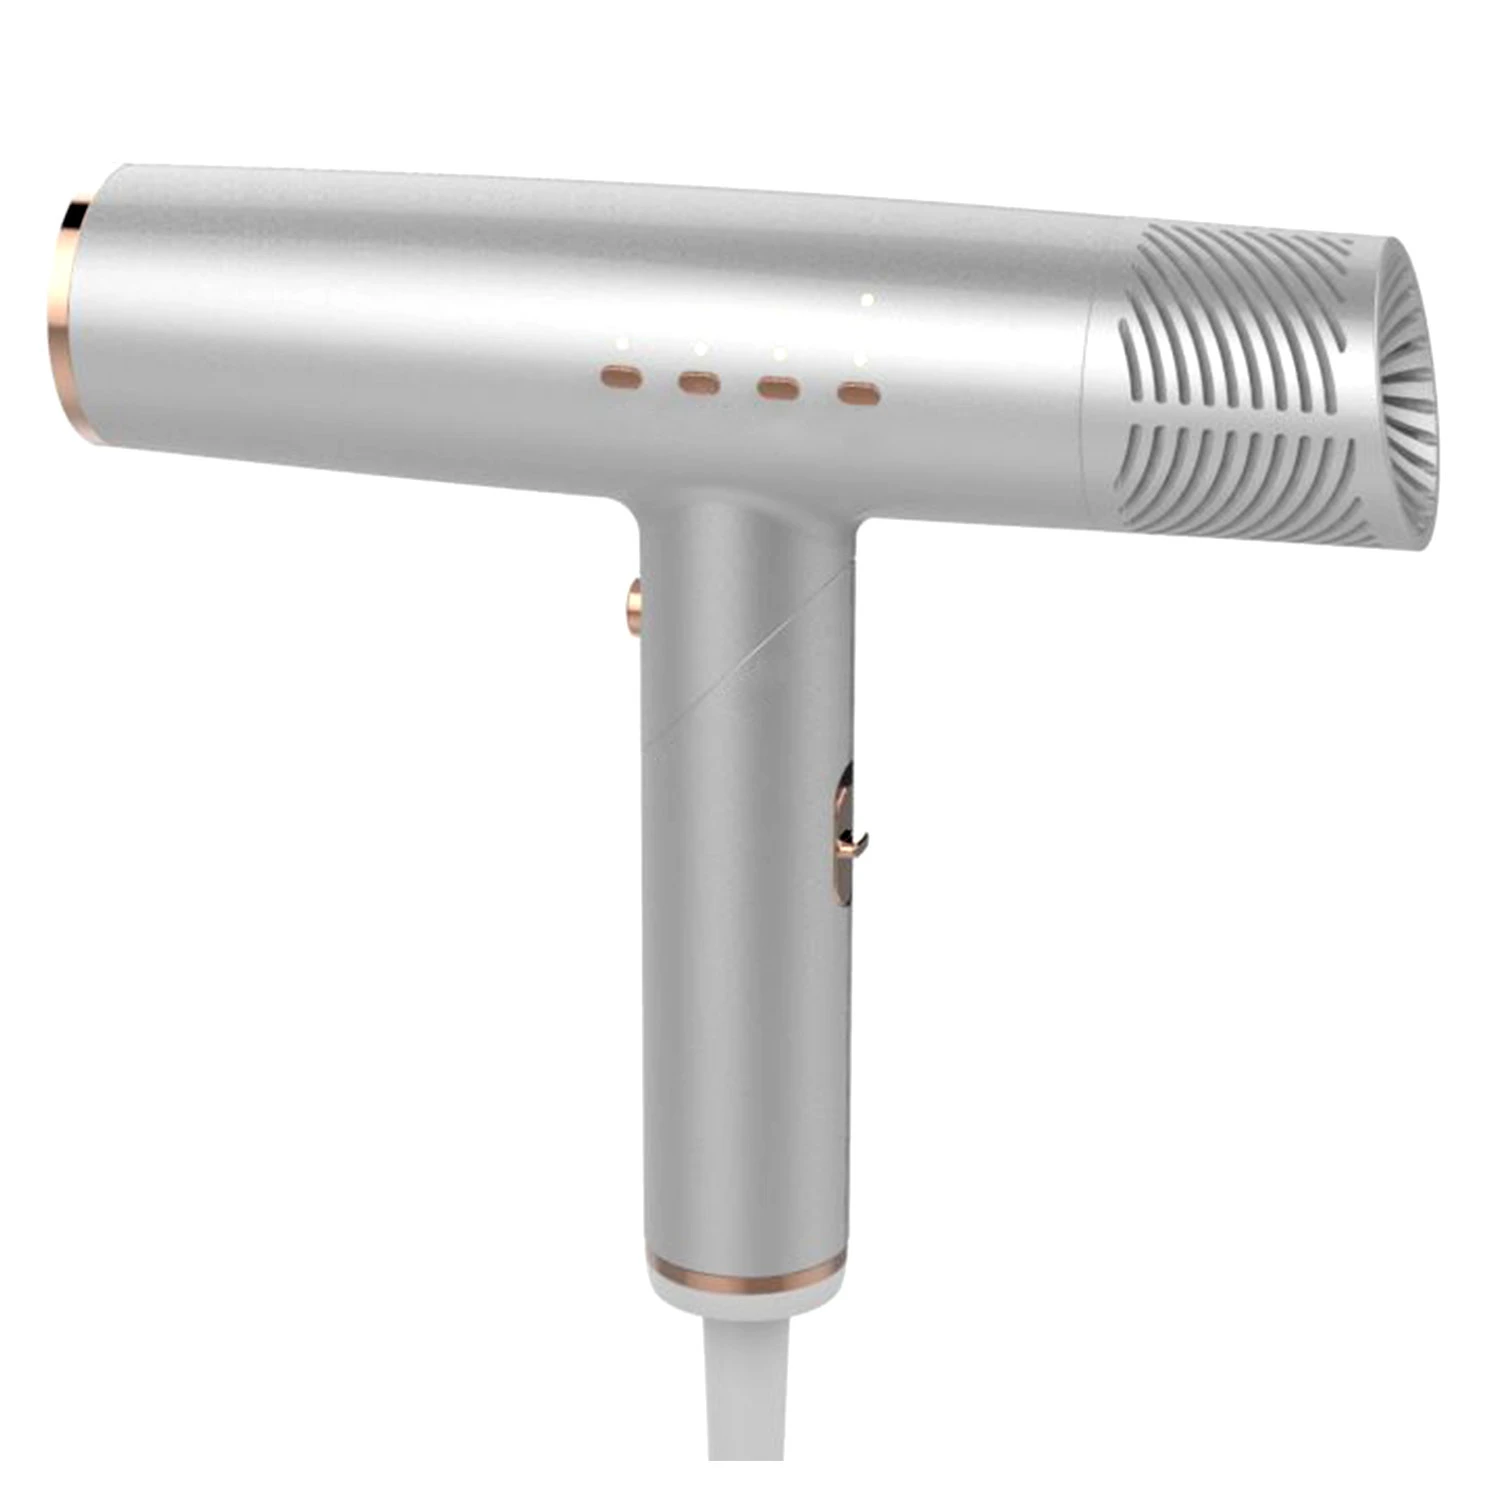 2021 Newest Design Hair Dryer Hair Styling Tools Fast Straight Hot Air Styler Hair Blow Dryer